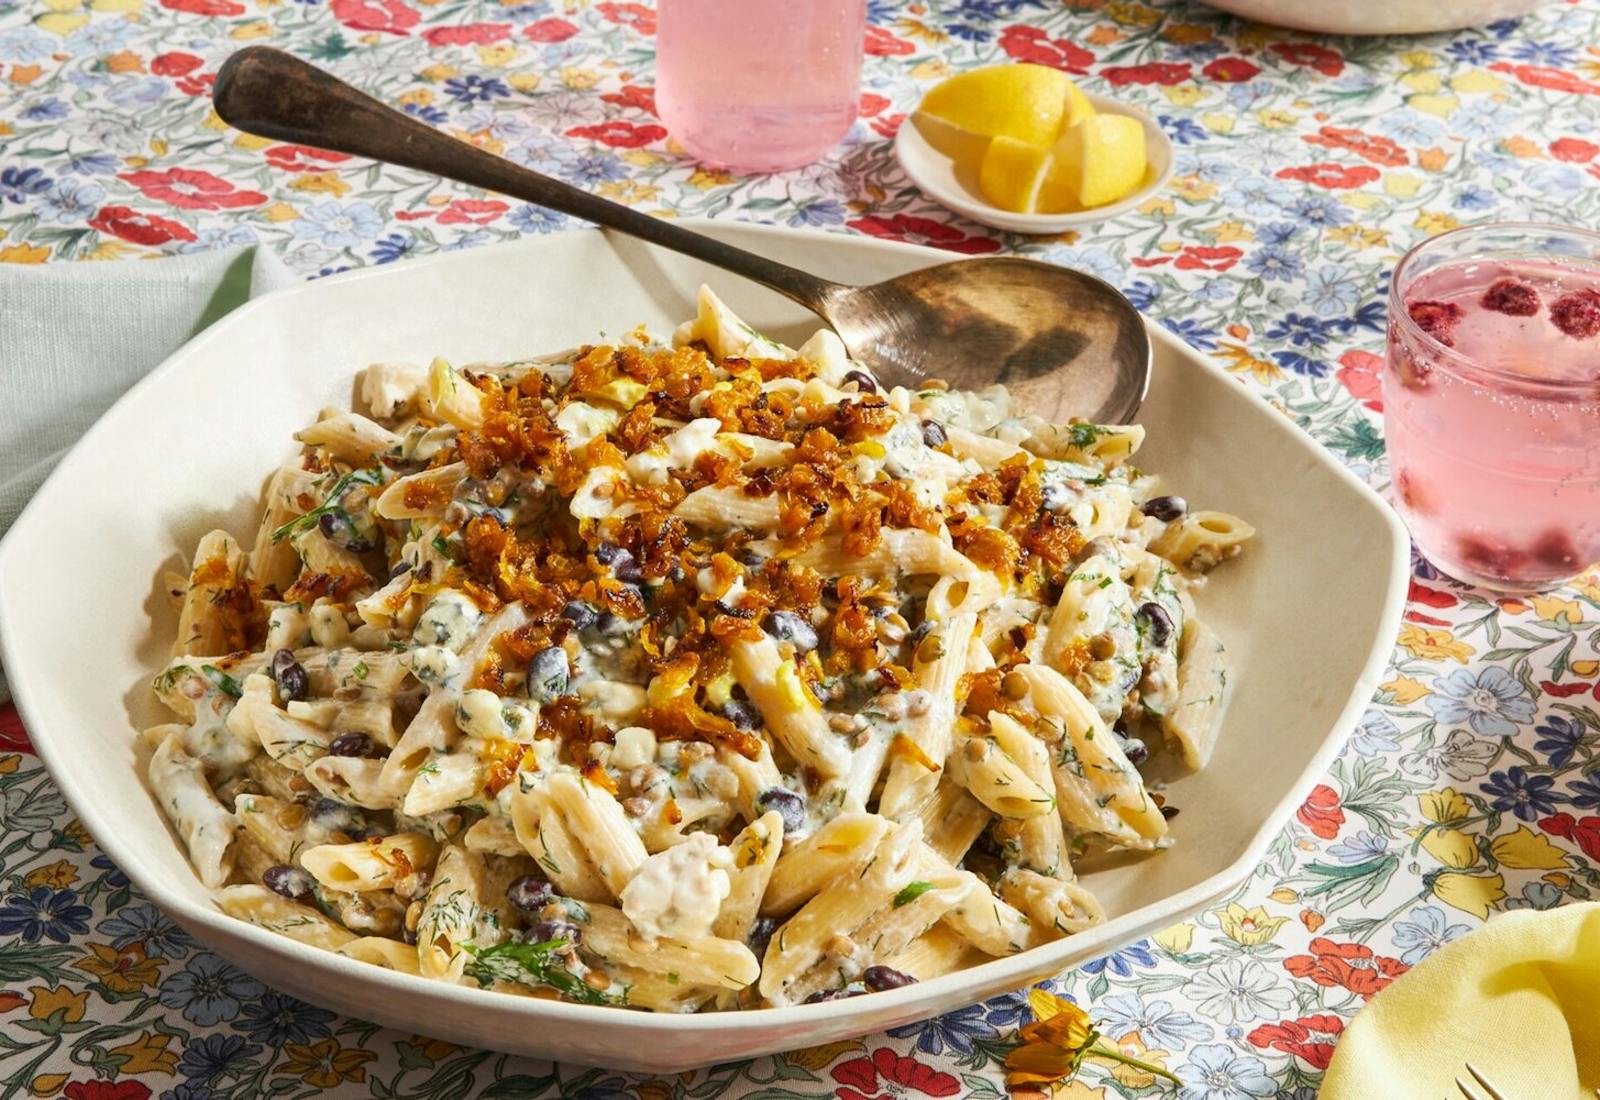 Pasta garnished with fried onions, bowl of lemon wedges and raspberry cocktails atop floral tablecloth. 